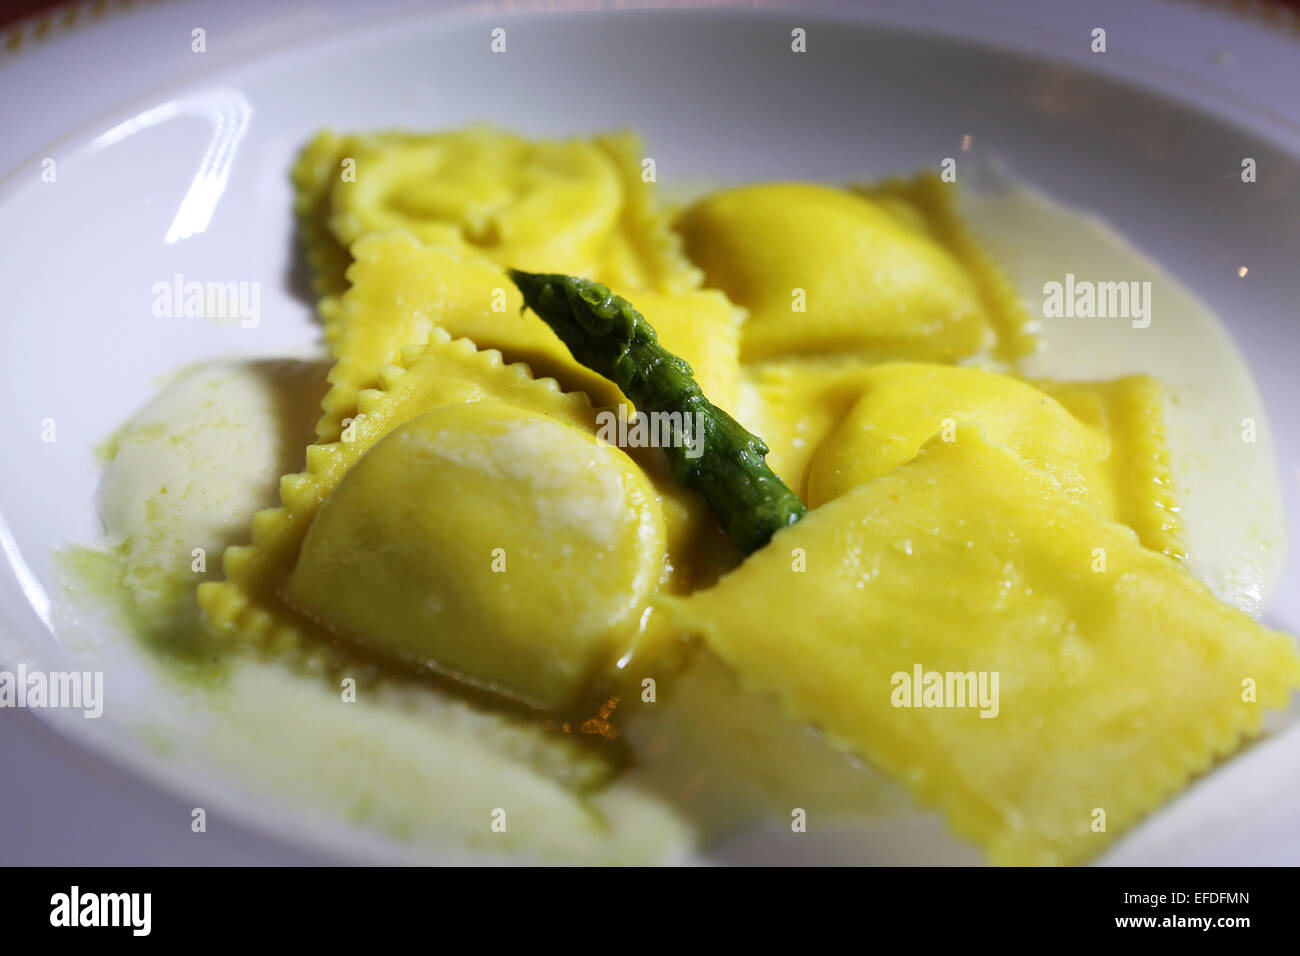 Ravioli with green asparagus served in Milan, Italy. The dish has a creamy cheese sauce. Stock Photo